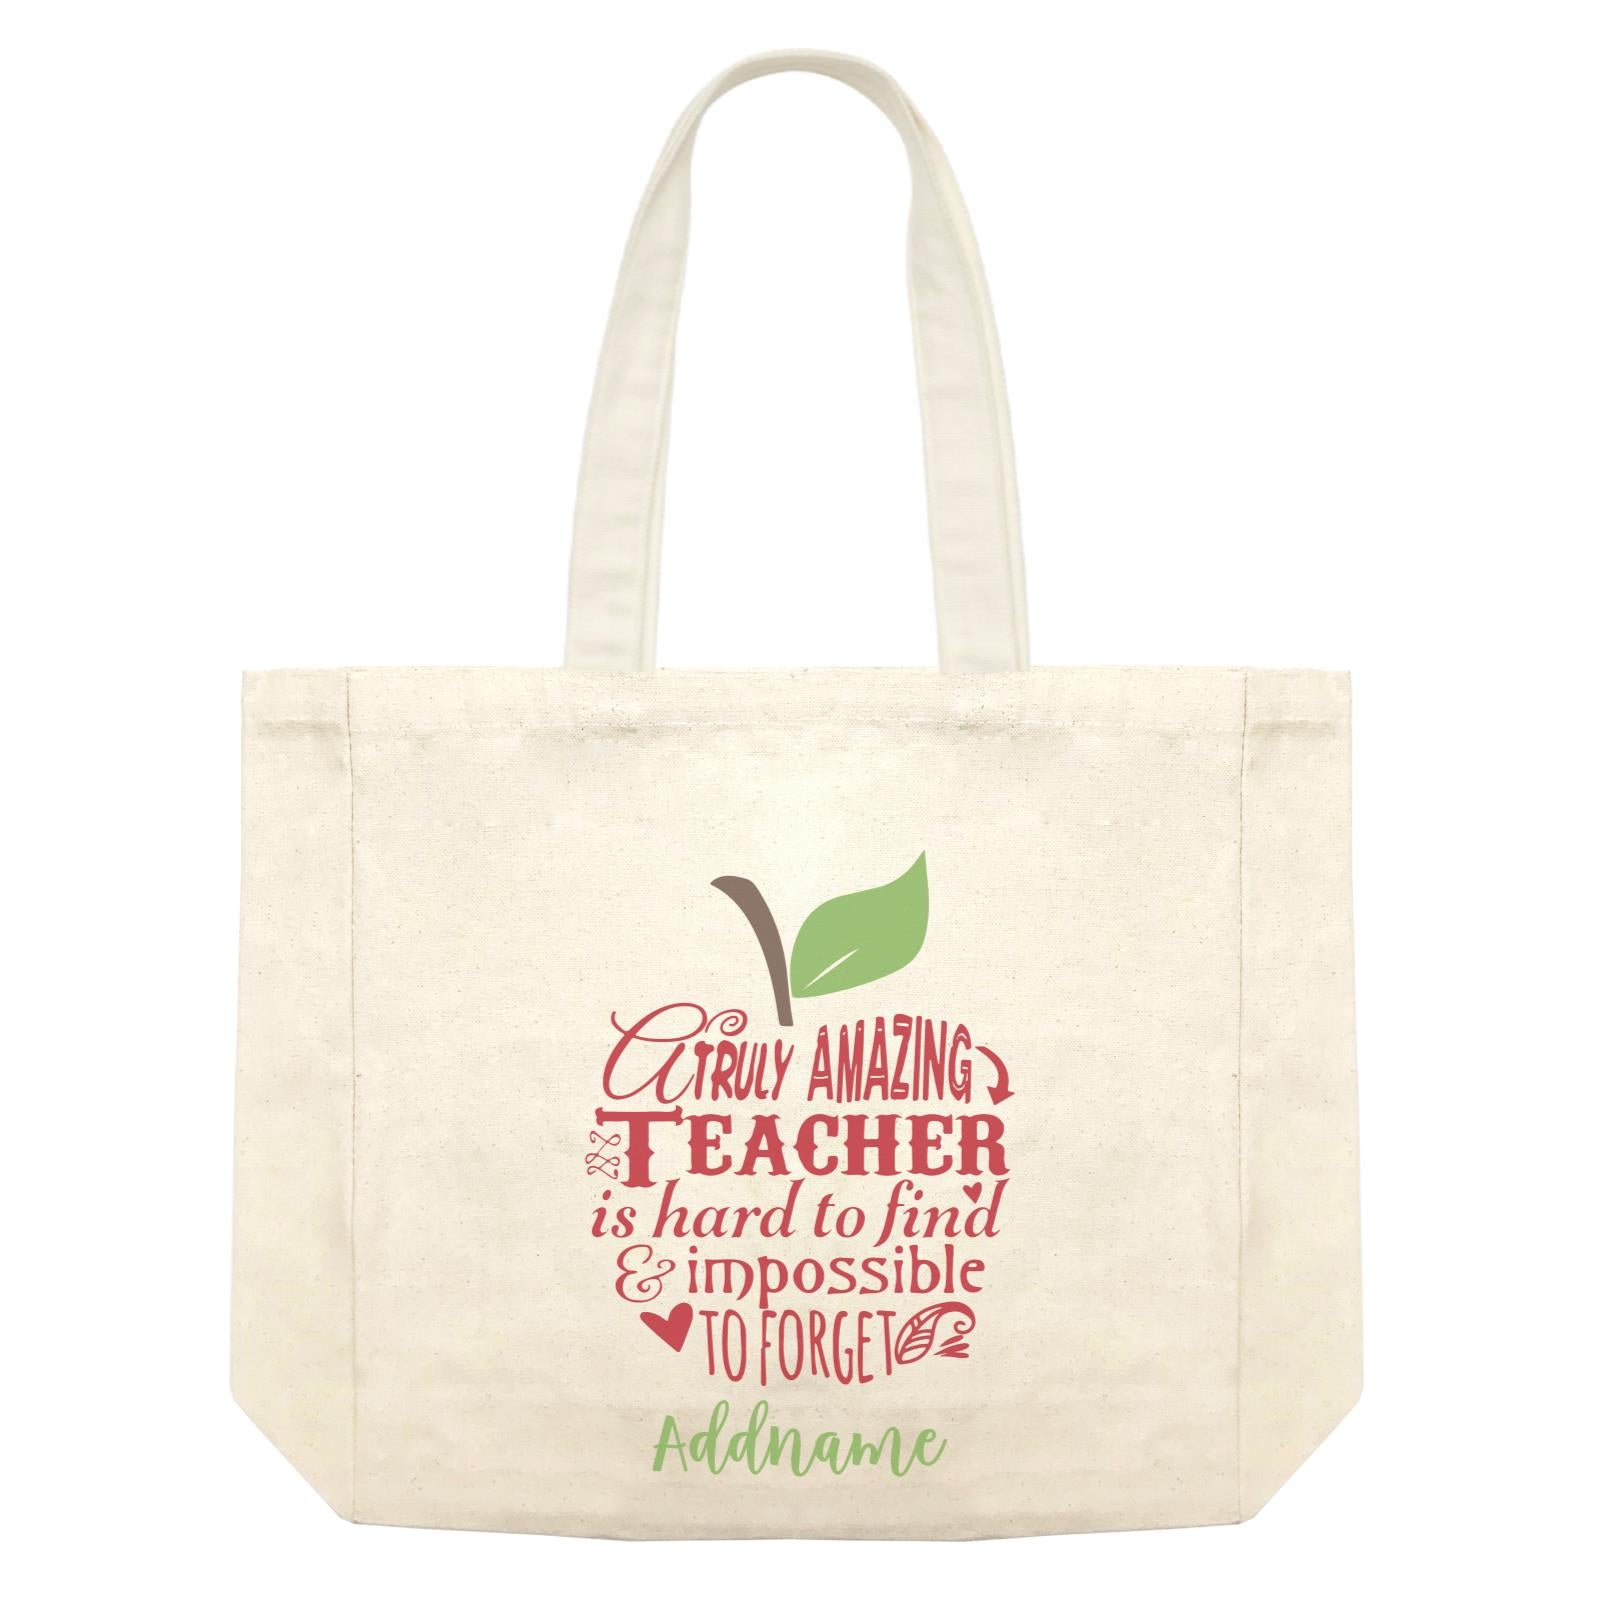 Teacher Apple Truly Amazing Teacher is Had To Find & Impossible To Forget Addname Shopping Bag